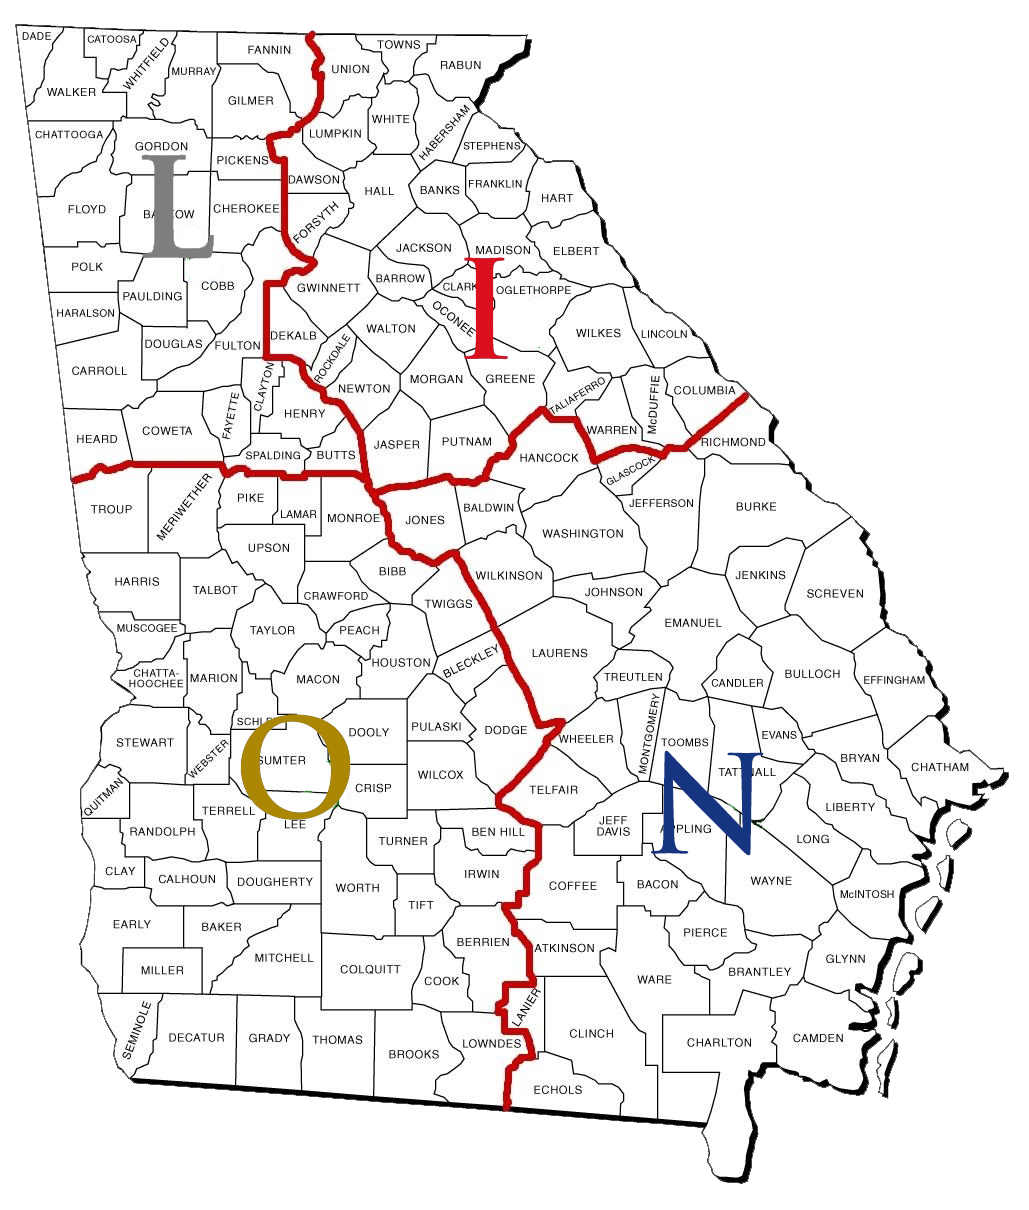 Picture of the Georgia State map showing the four Districts in the MD-18 Distirct. Each district has it's own color. L is Grey, I is RED, O is GOLD, N is BLUE